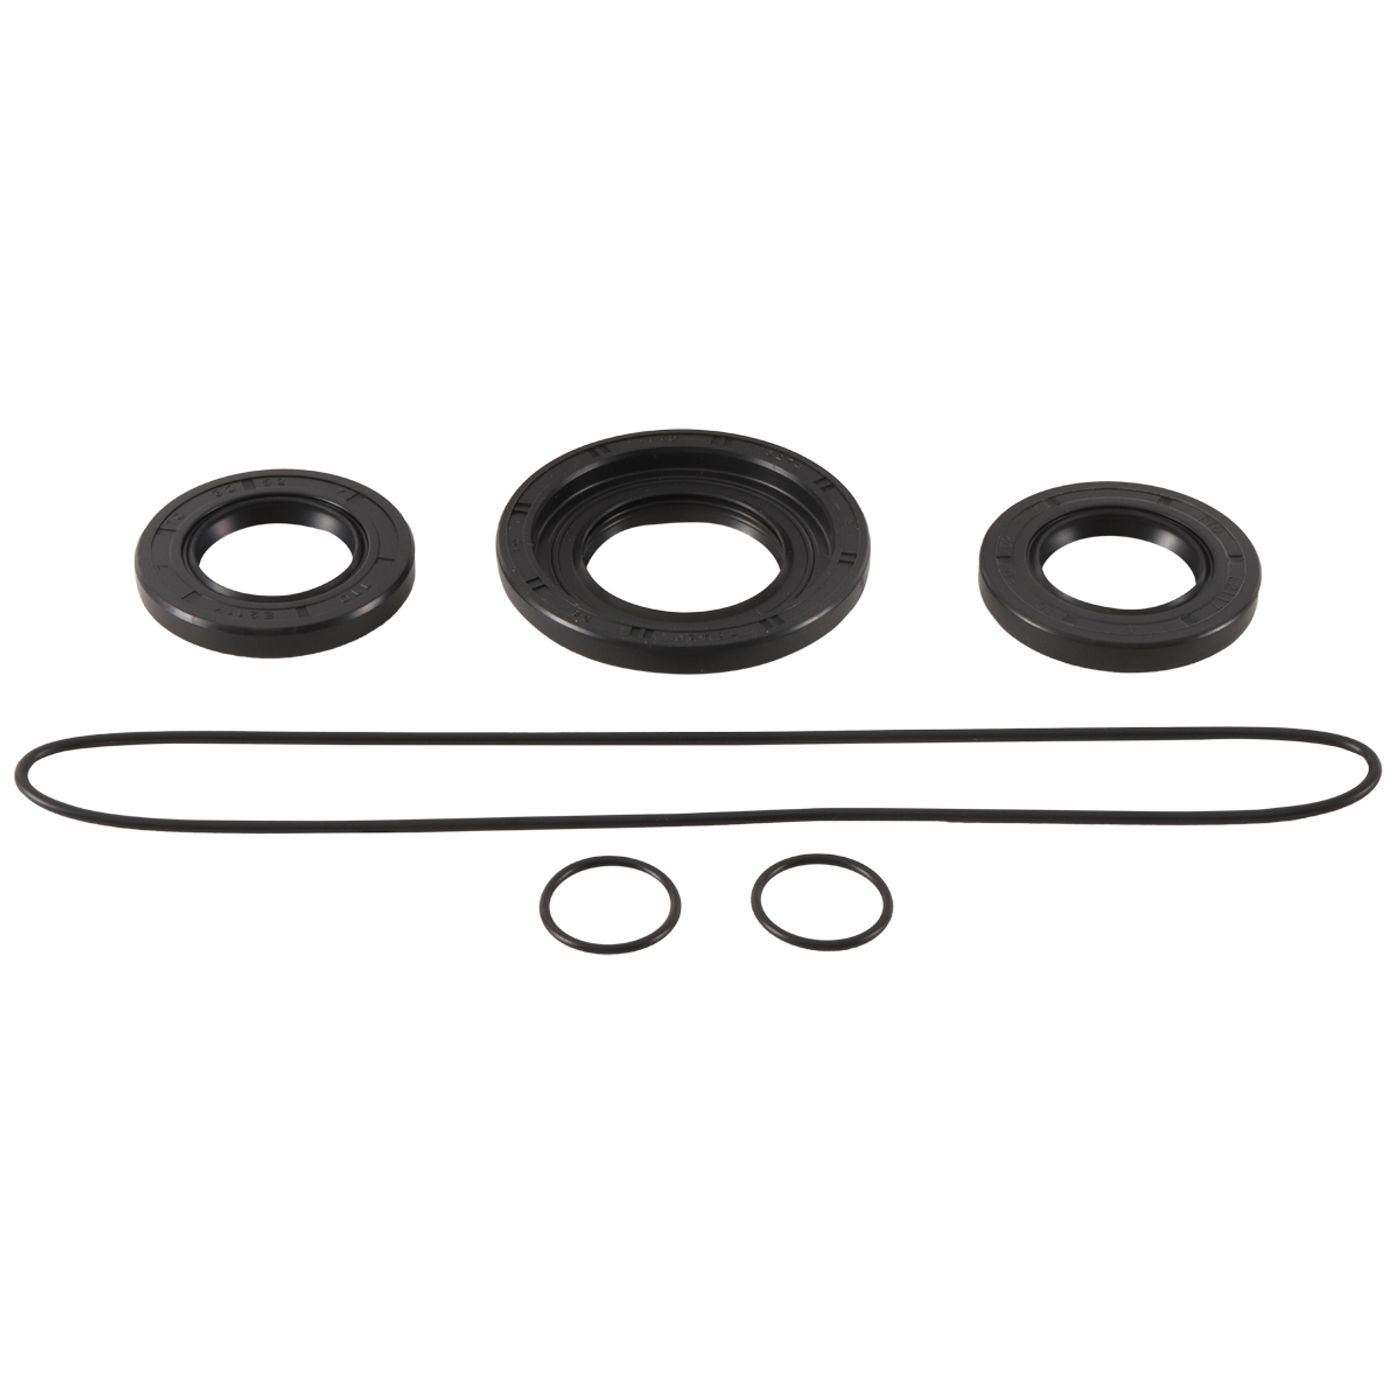 Wrp Diff Seal Kits - WRP252106-5 image